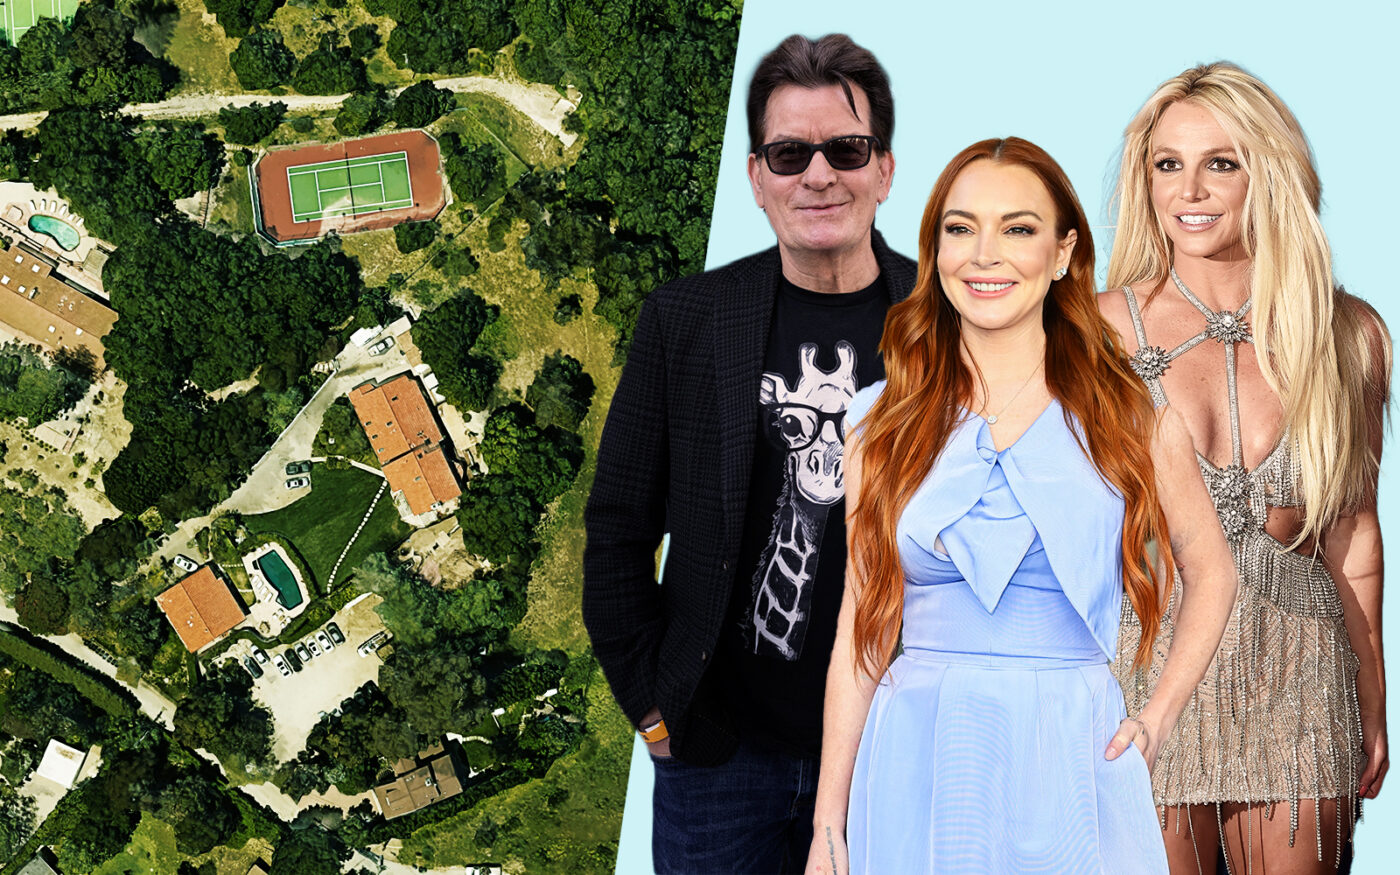 The former Promises Malibu site at 20725 Rockcroft Drive in Malibu with Charlie Sheen, Lindsay Lohan and Britney Spears